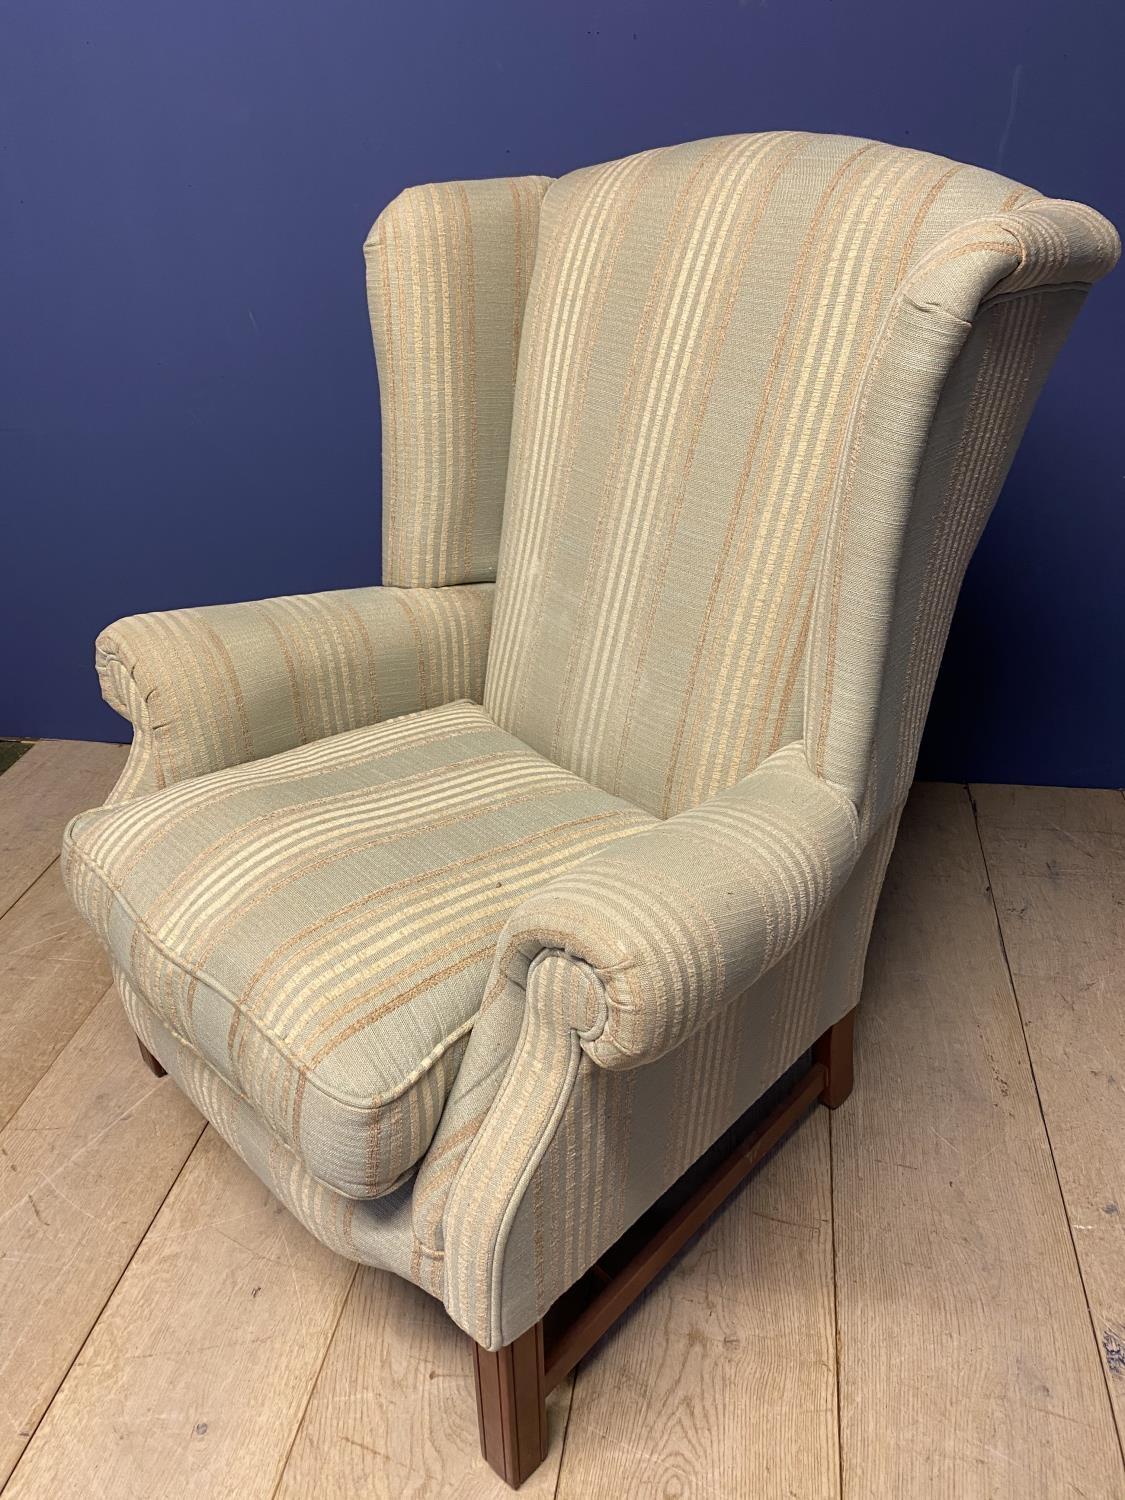 Good quality modern traditional winged arm chair, PARKER KNOWLE, with deep cushion, upholstered in